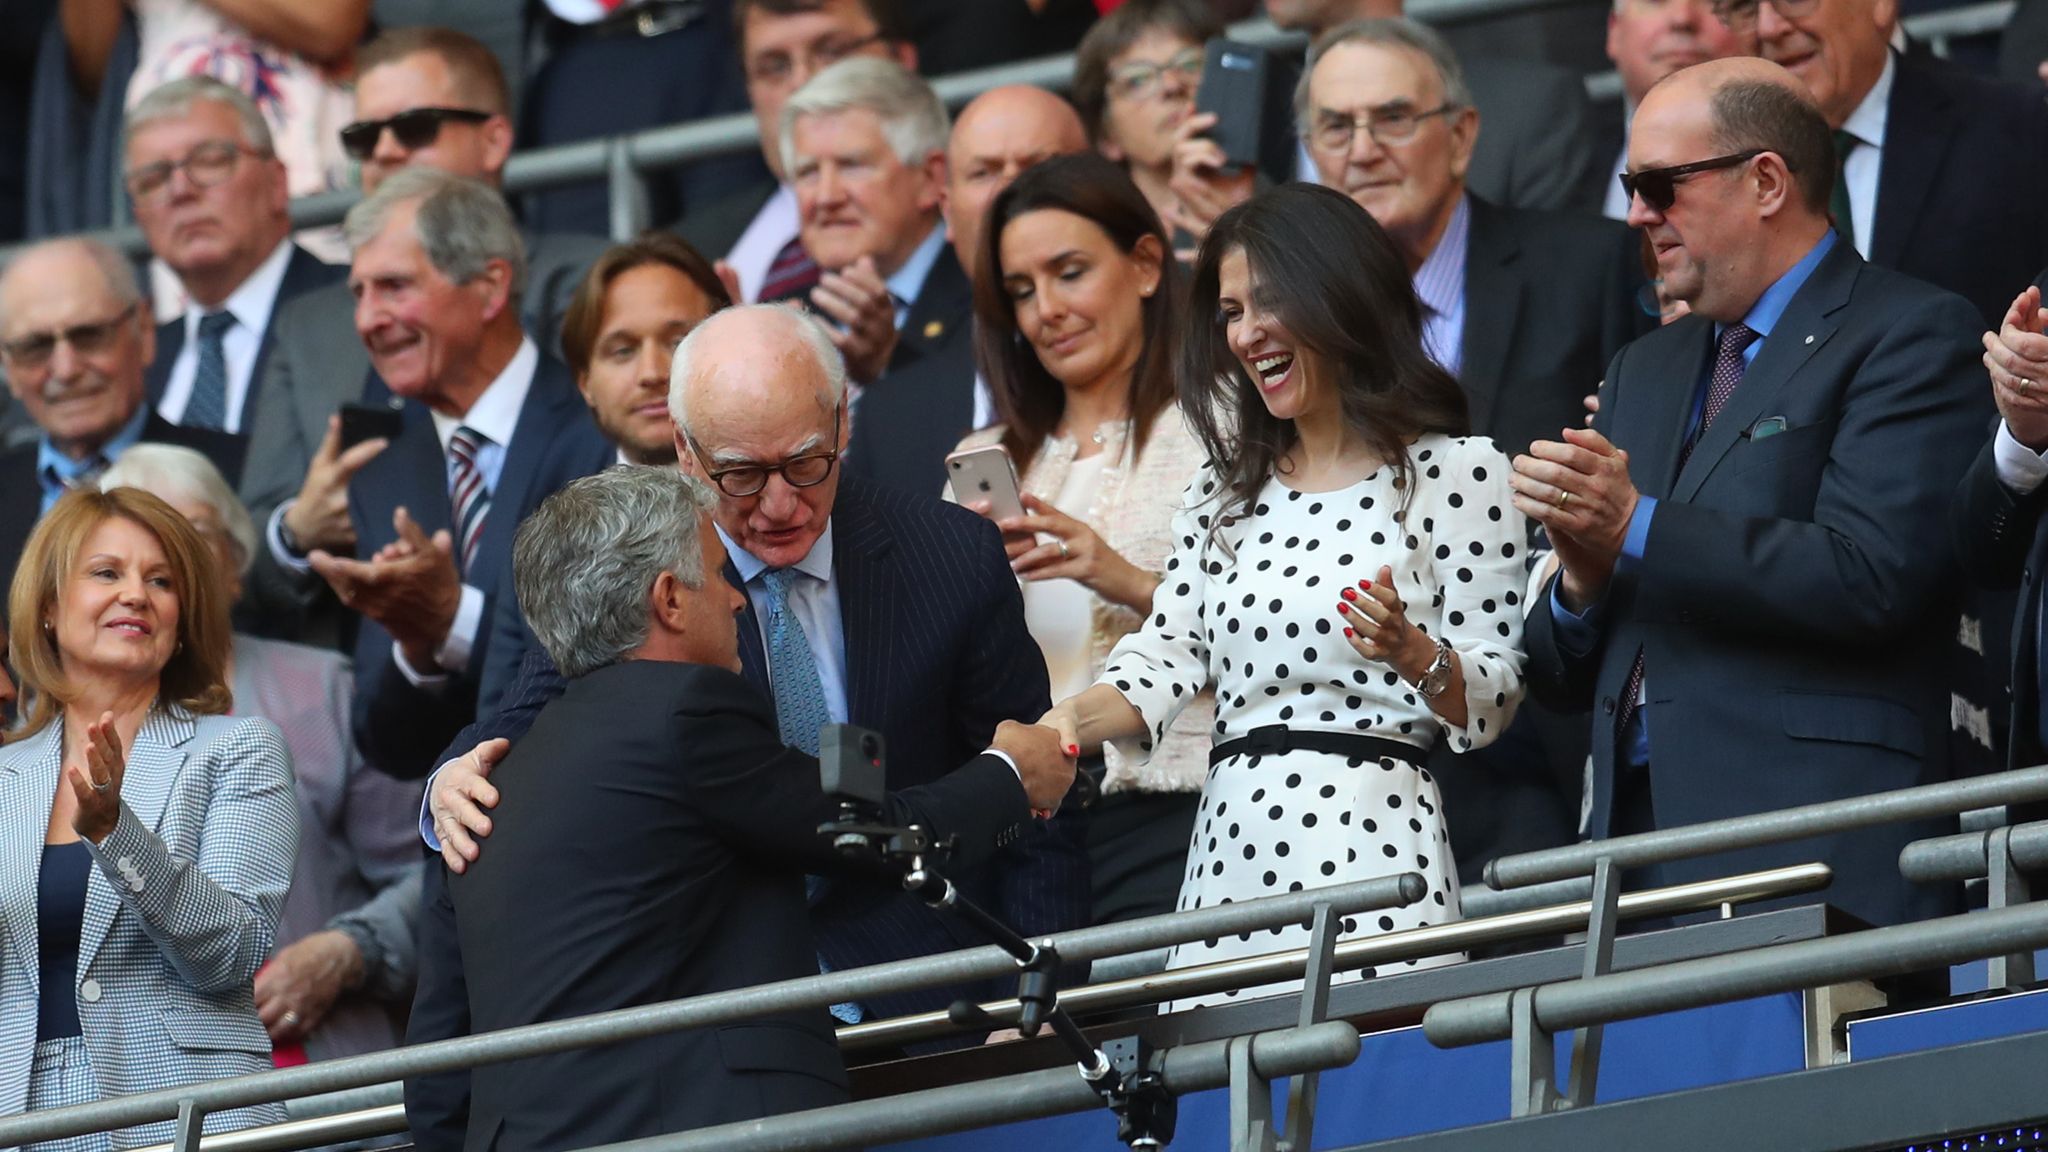 Chelsea director Marina Granovskaia is next in line to step down following Bruce Buck's exit. 